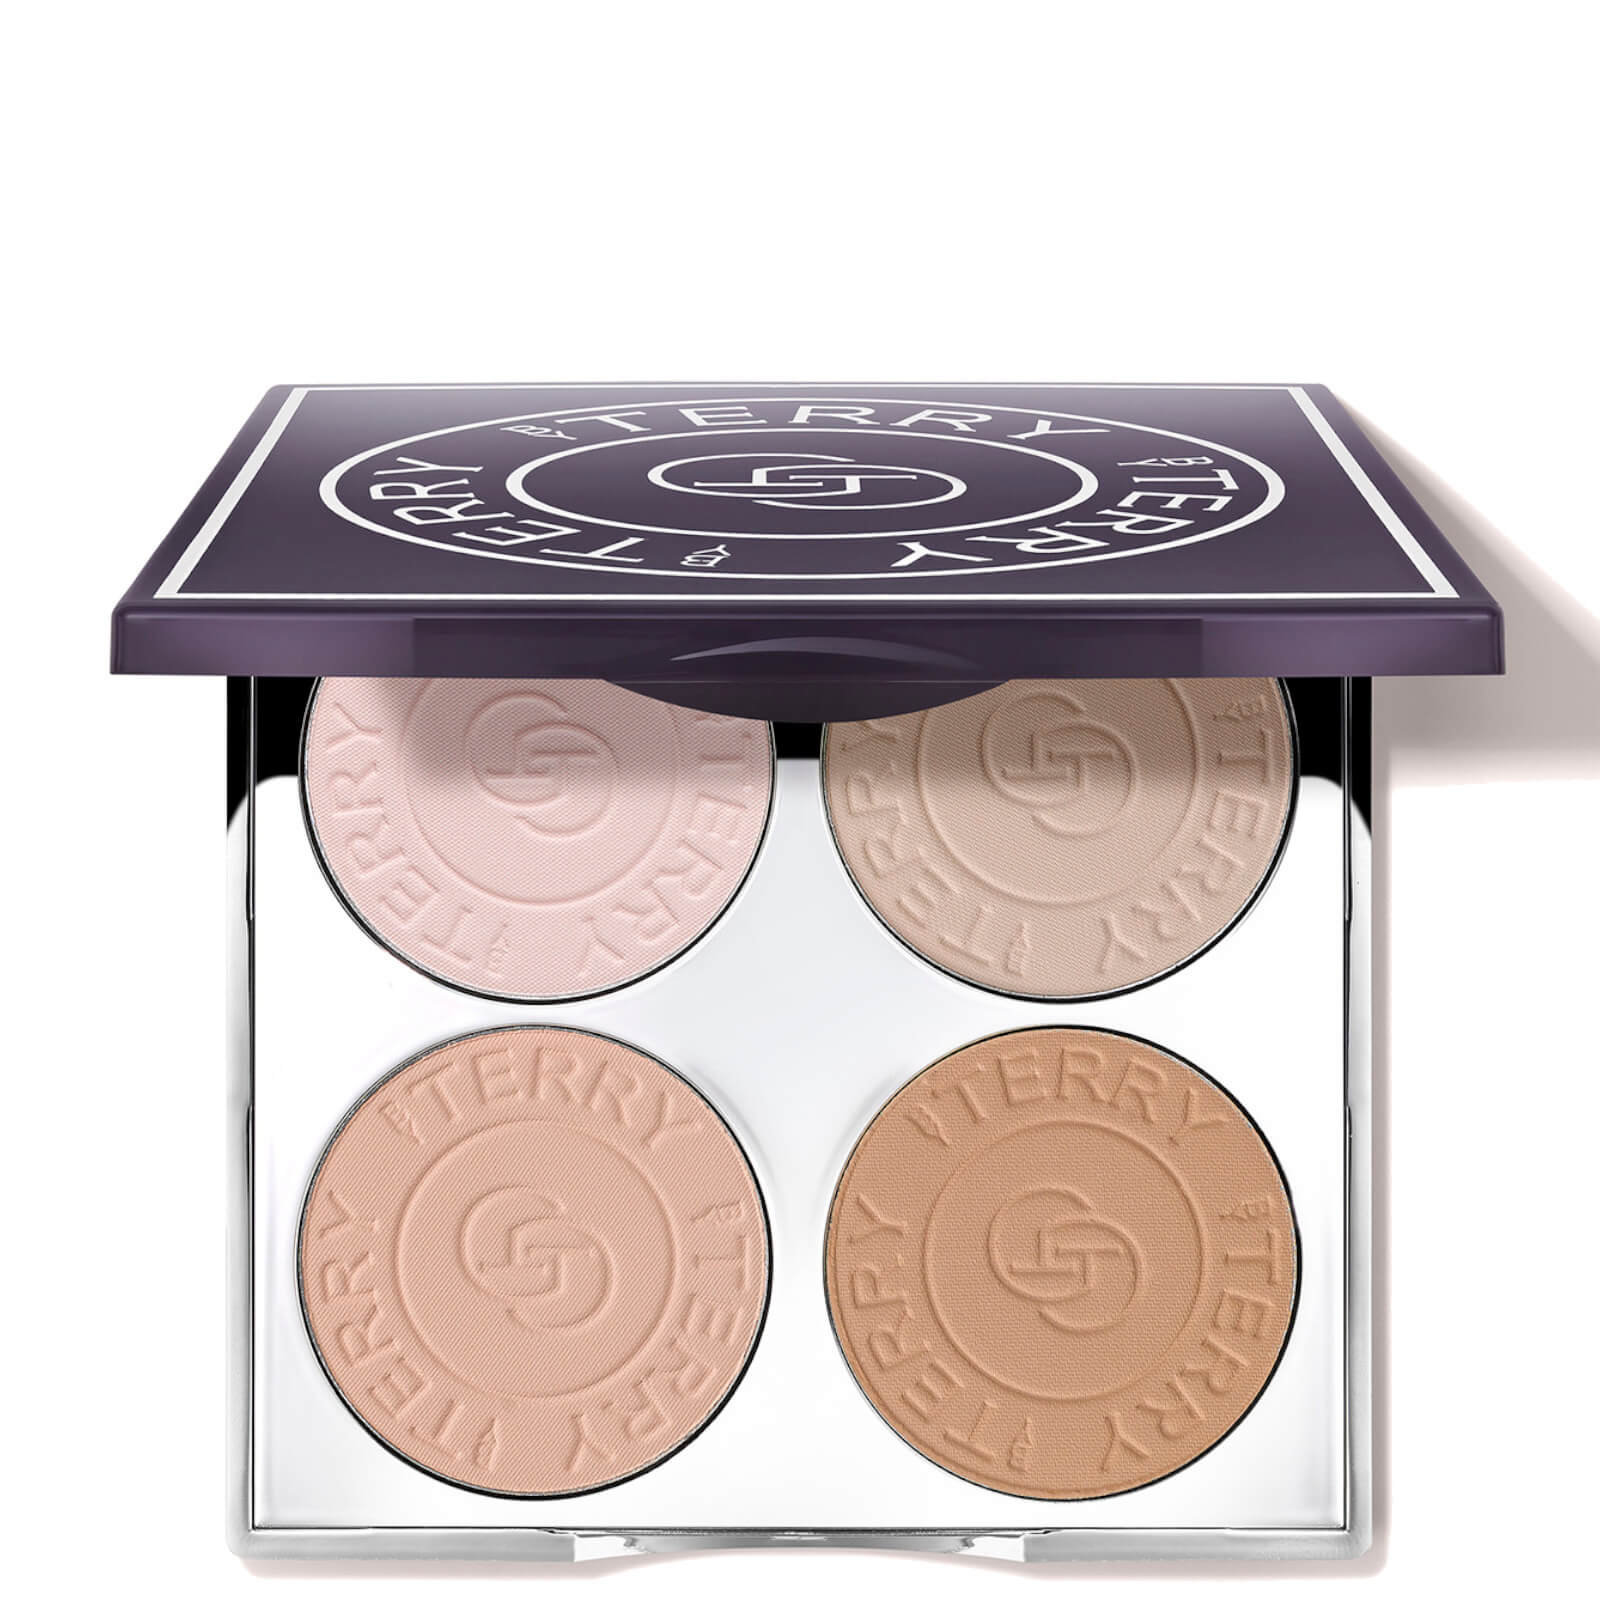 Image of By Terry Hyaluronic Hydra-Powder Palette - N°1 Fair to Medium